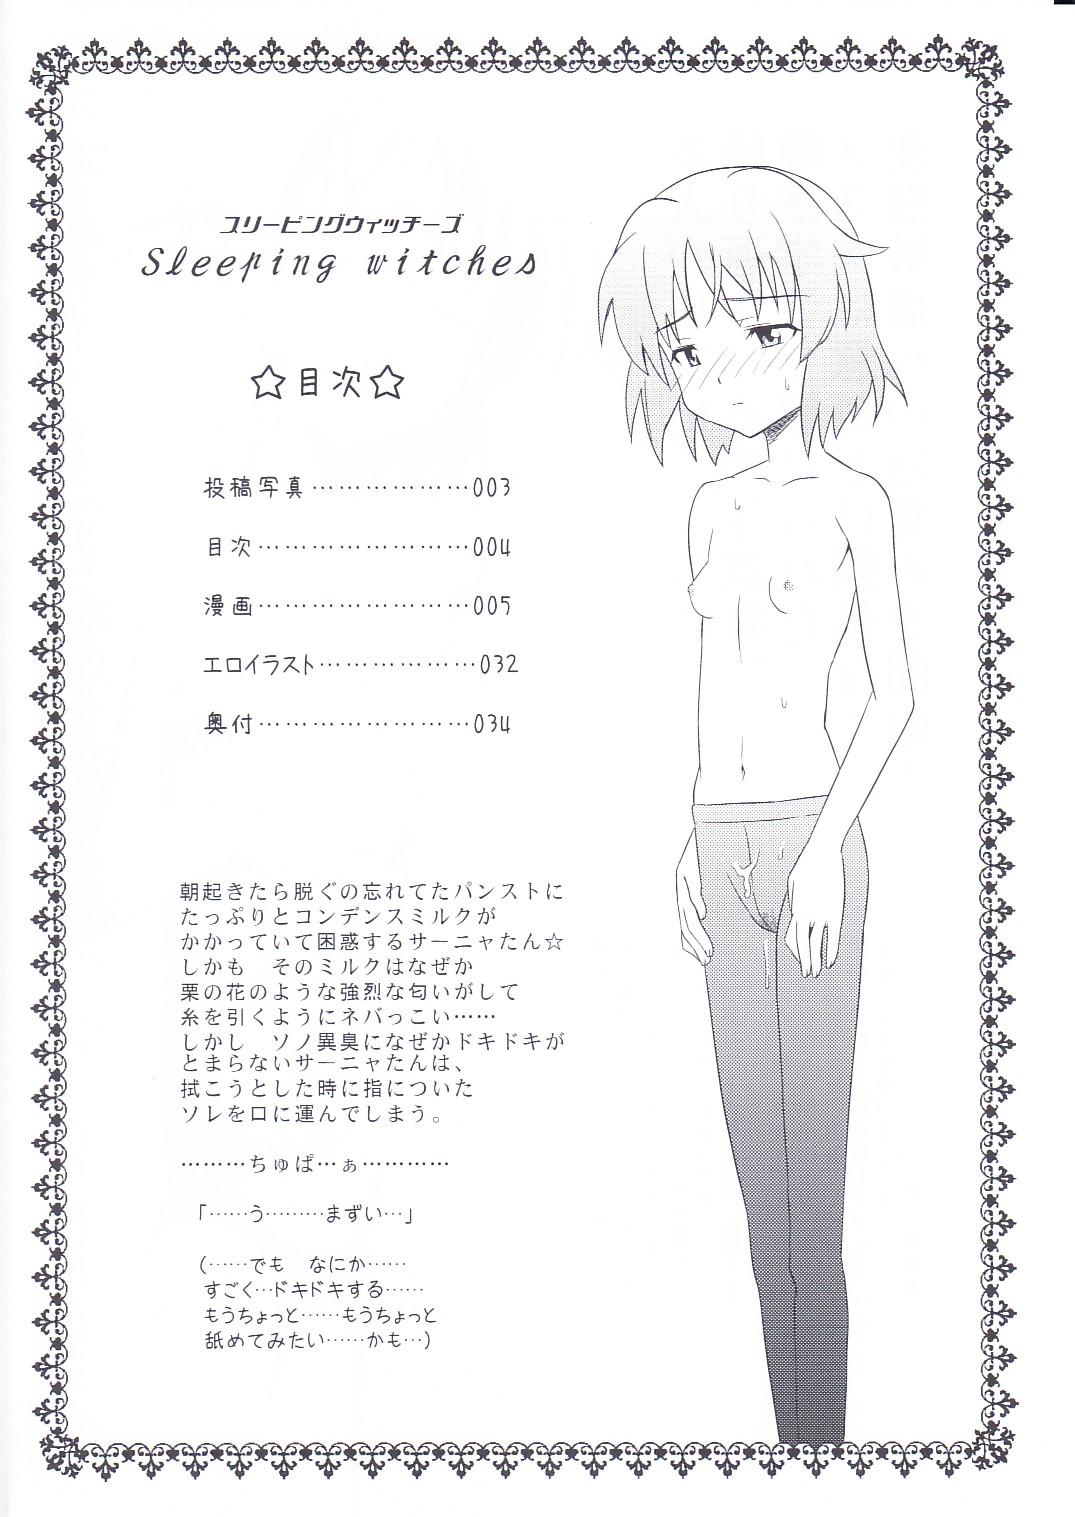 Punishment Sleeping witches - Strike witches Tall - Page 3